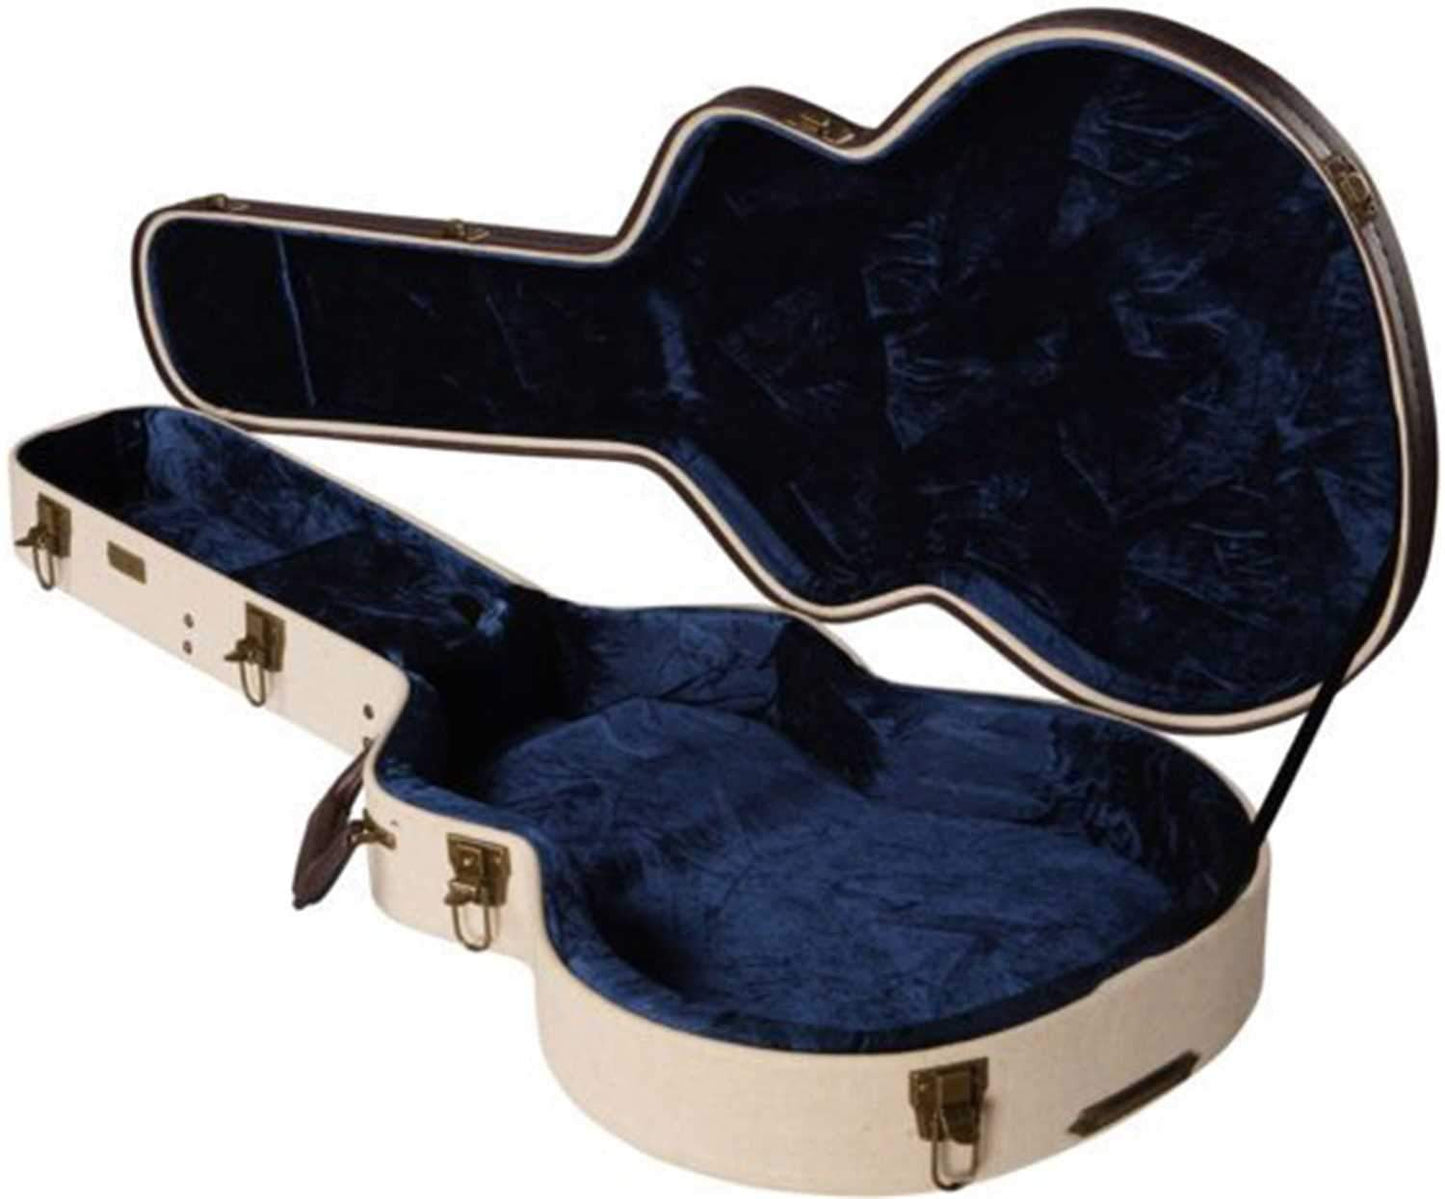 Gator GW-JM 335 Semi-Hollow Electric Guitar Case - ProSound and Stage Lighting